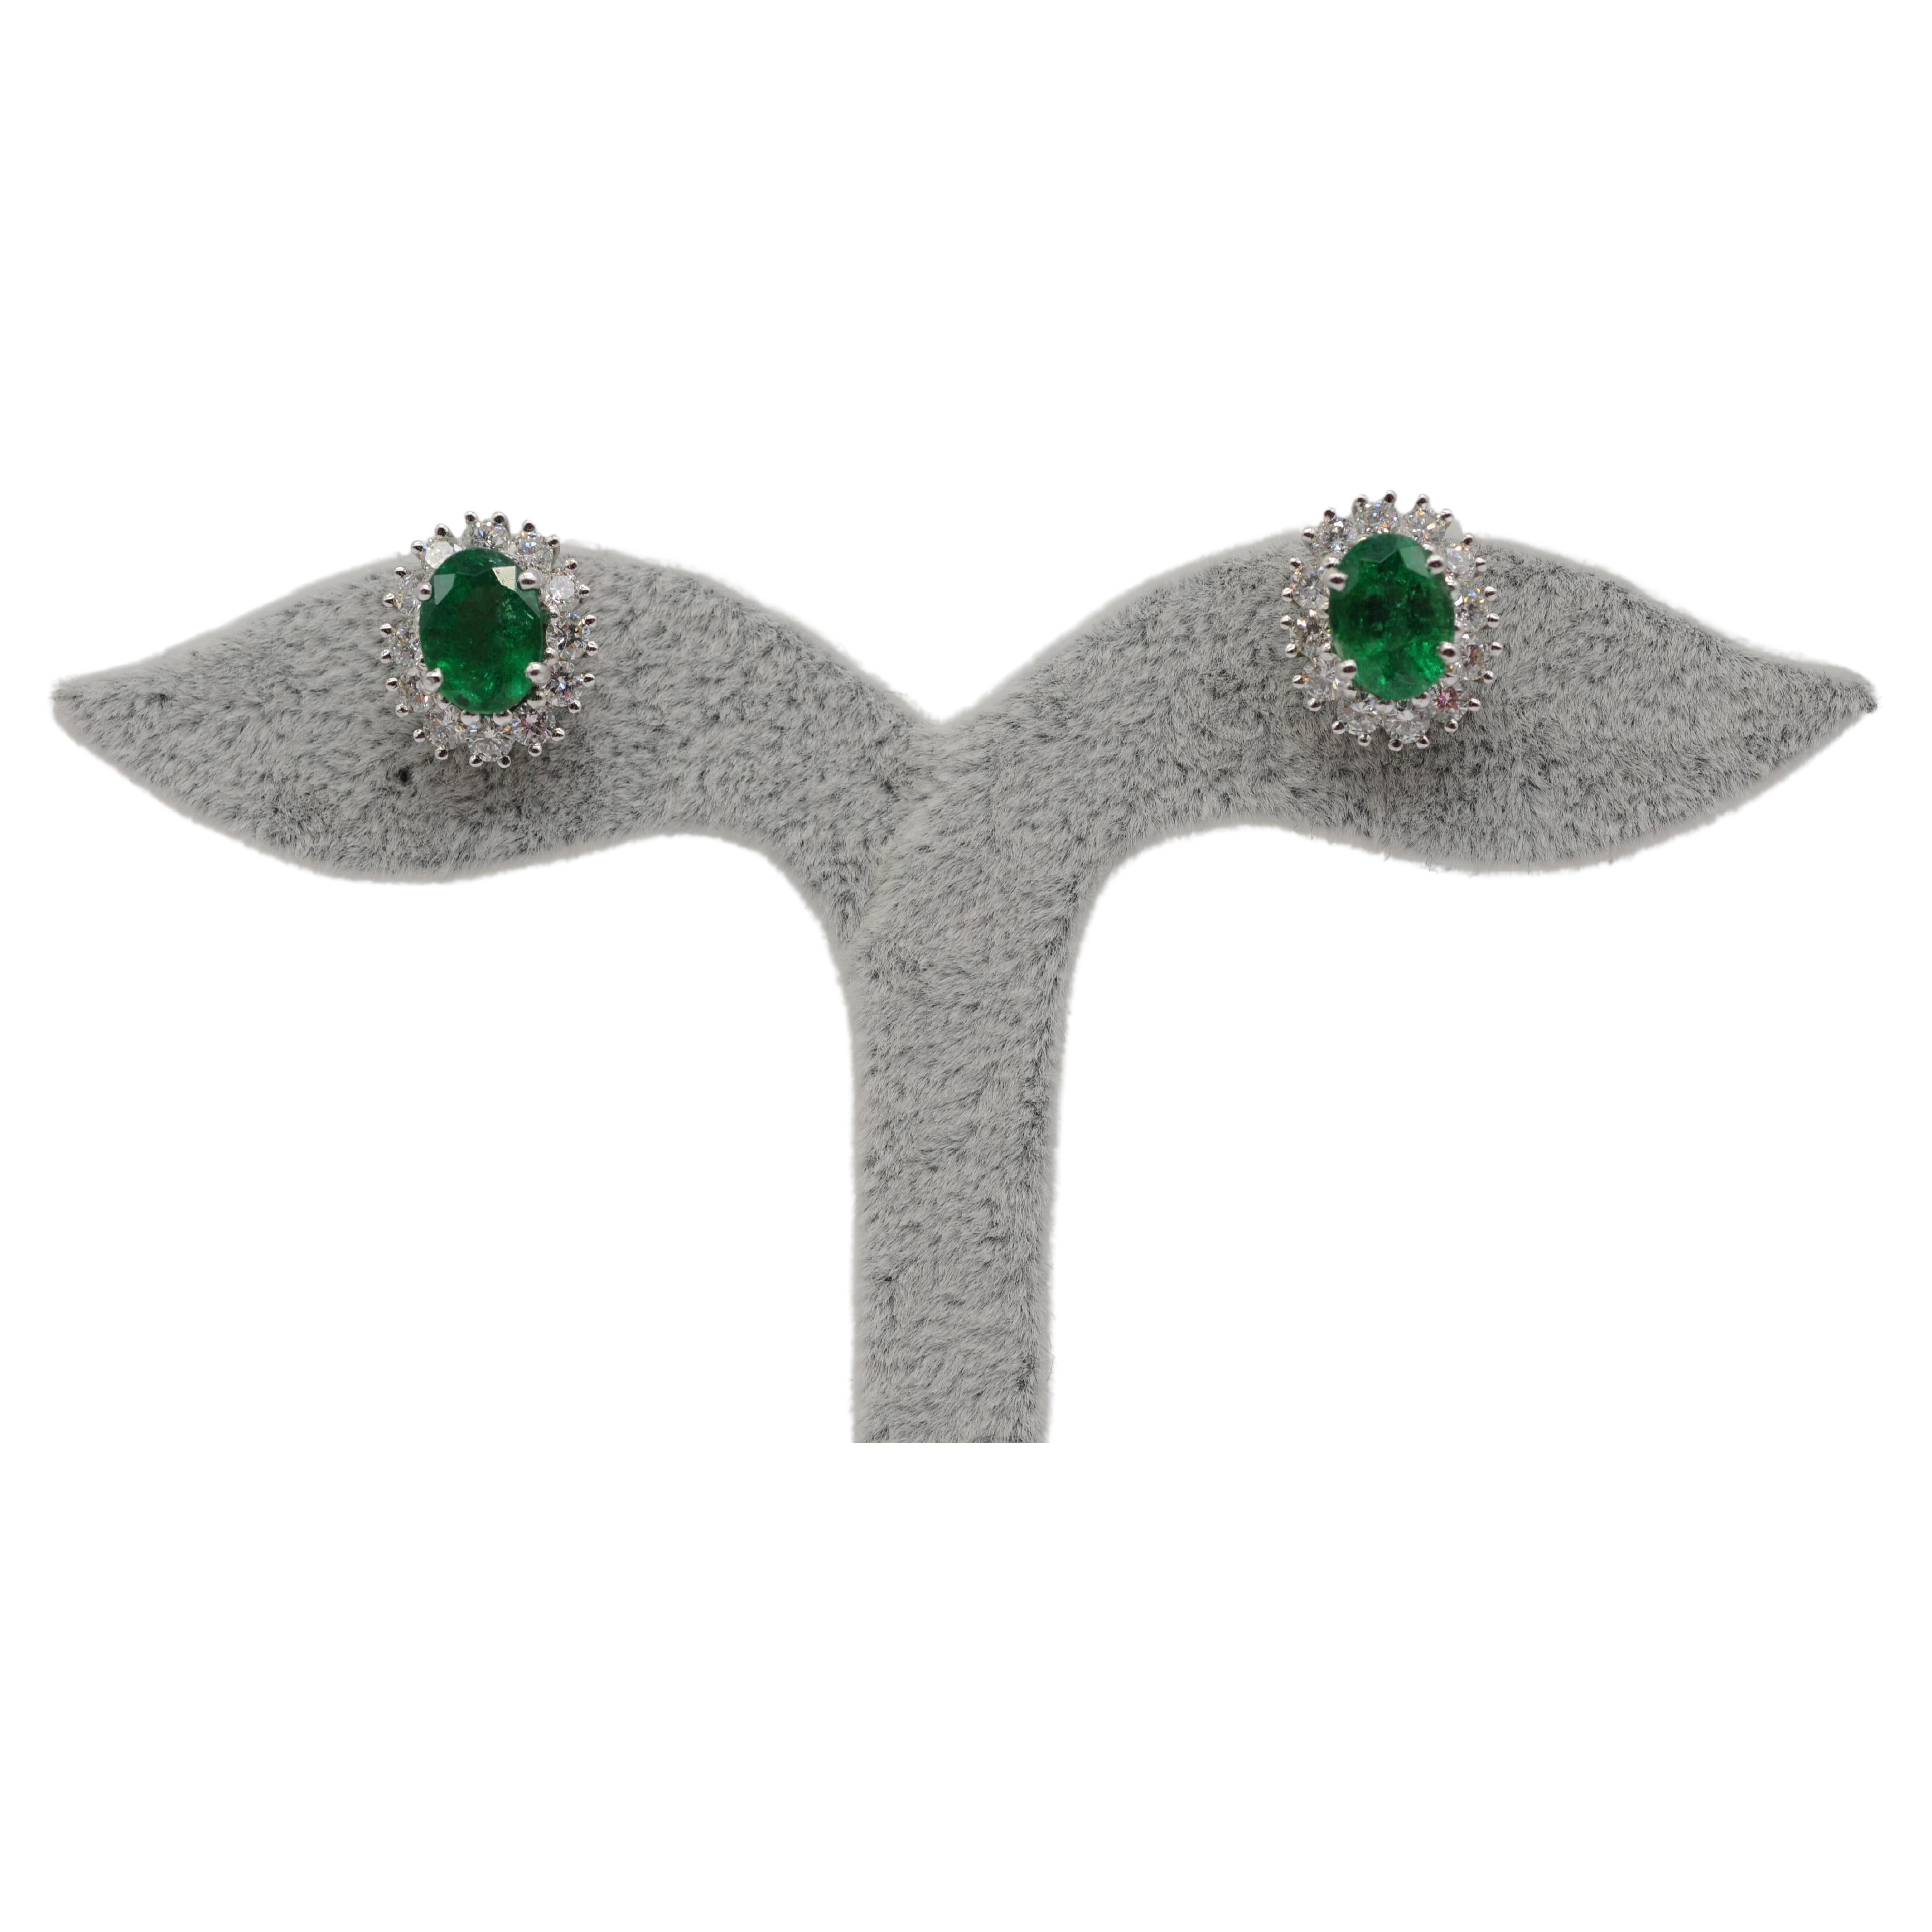 Indulge in the breathtaking beauty of this pair of exquisite earrings, meticulously crafted with emeralds and diamonds set in 18k white gold. Each ear stud boasts twelve diamonds, each weighing approximately 0.05 carats, expertly cut in brilliant